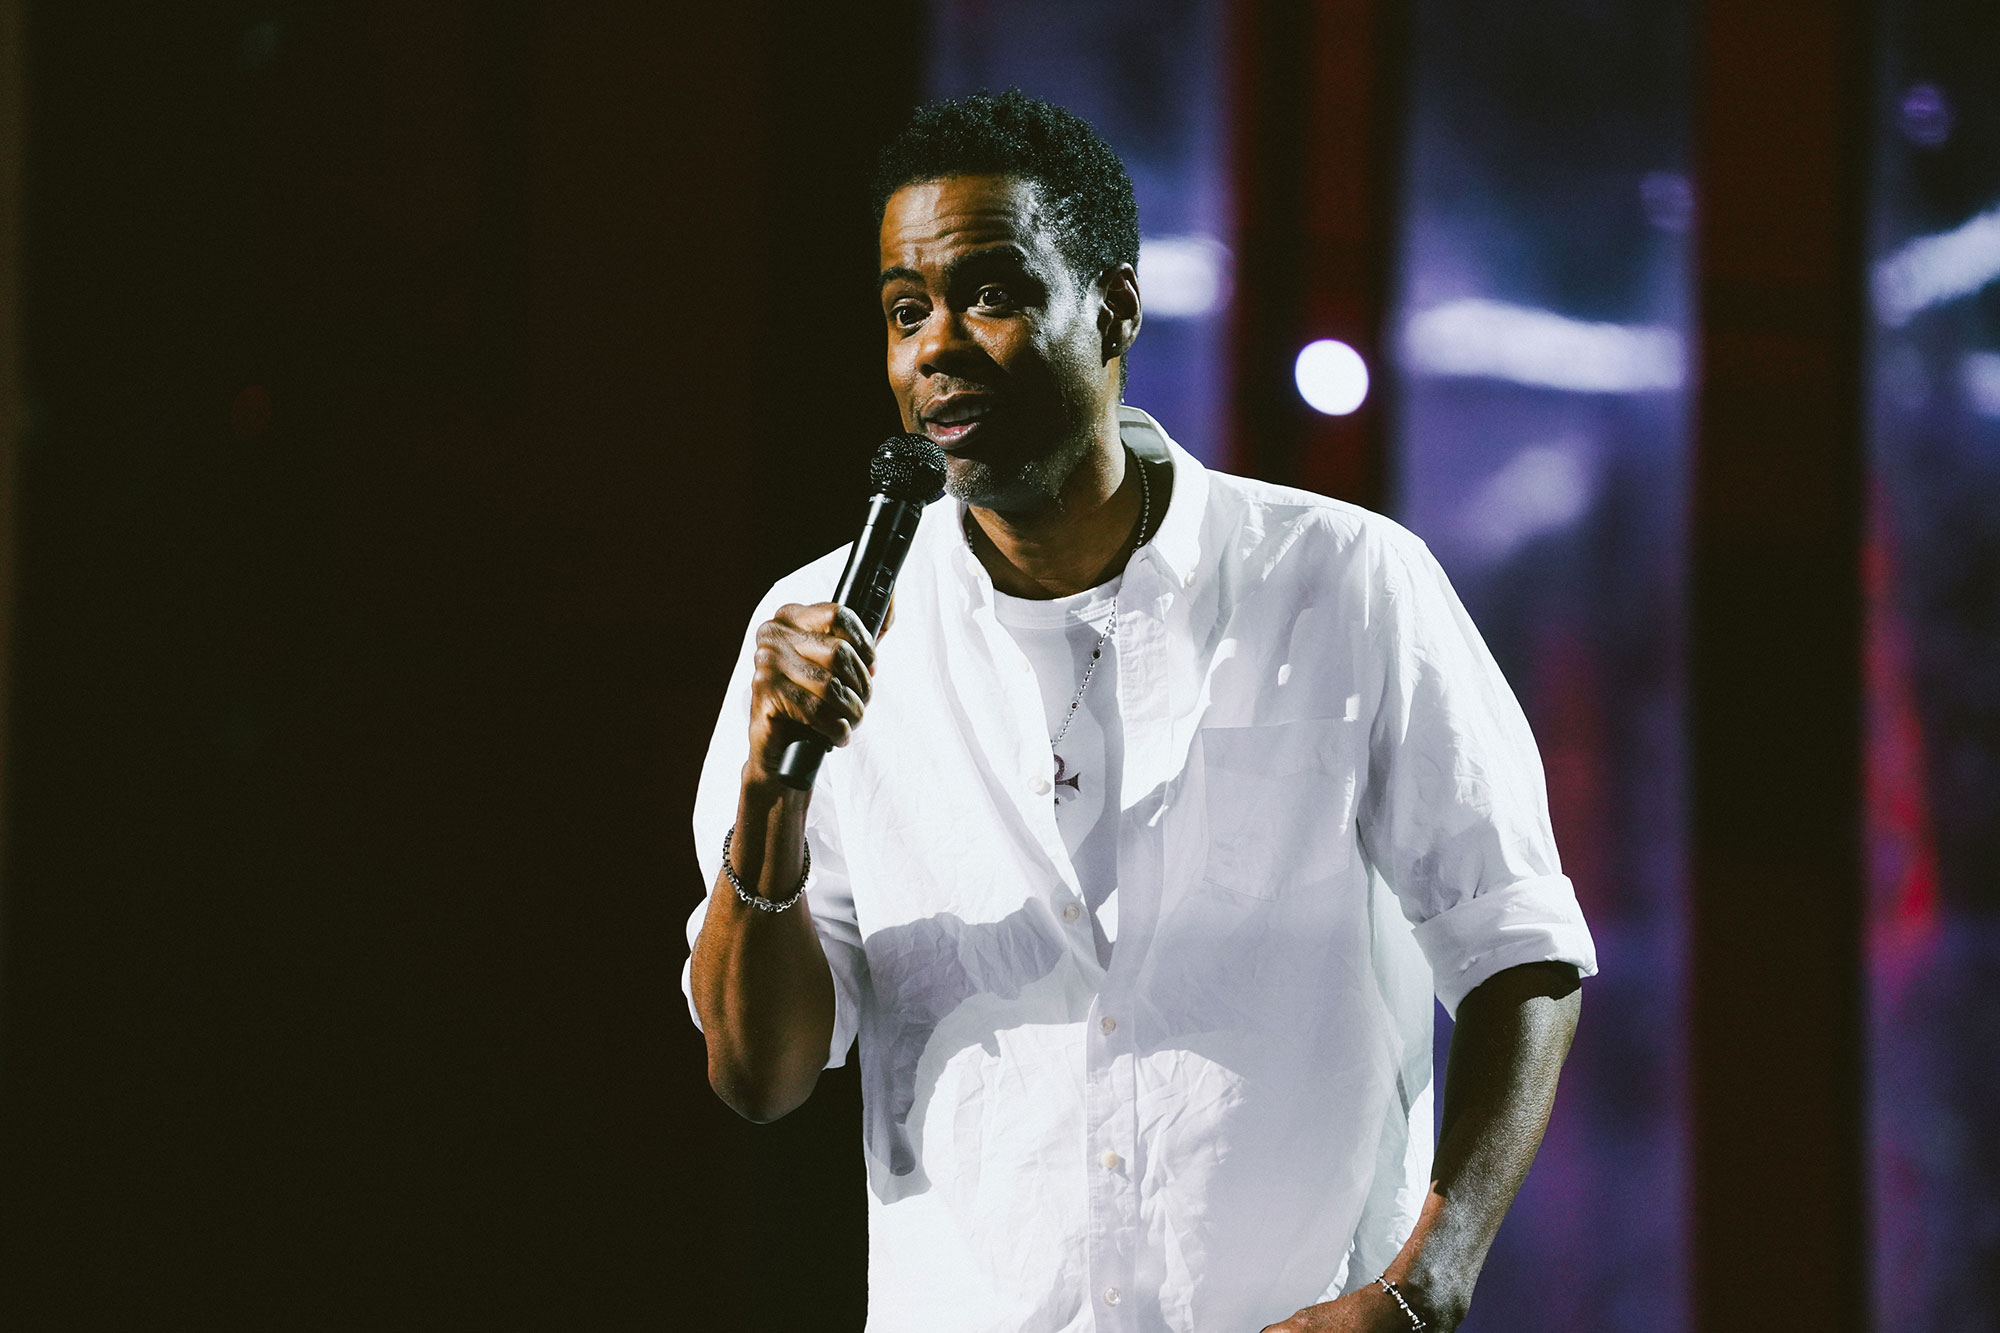 Comedian Chris Rock admitting abortion kills babies is not the cultural win some pro-lifers say it is